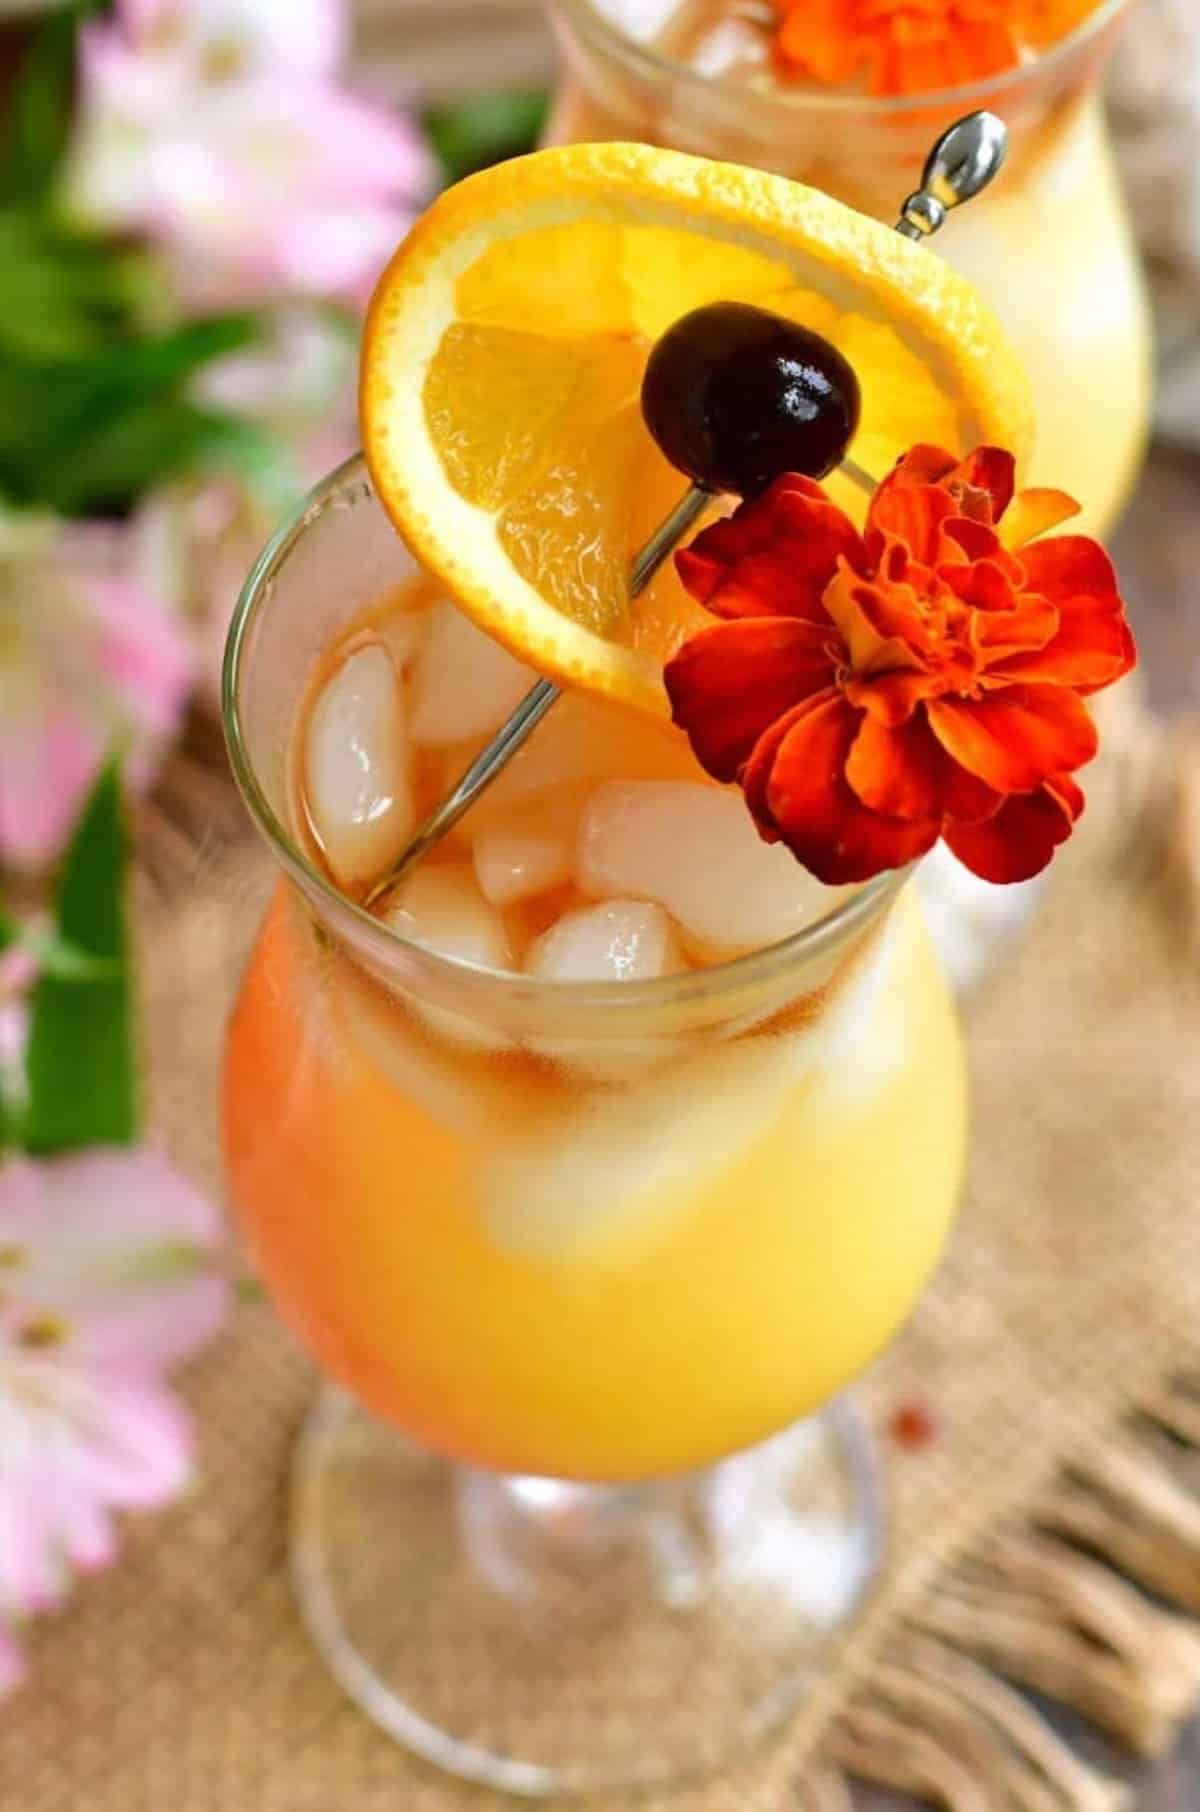 yellow cocktail in the glass with close up view of the flower and orange slice with cherry garnish.